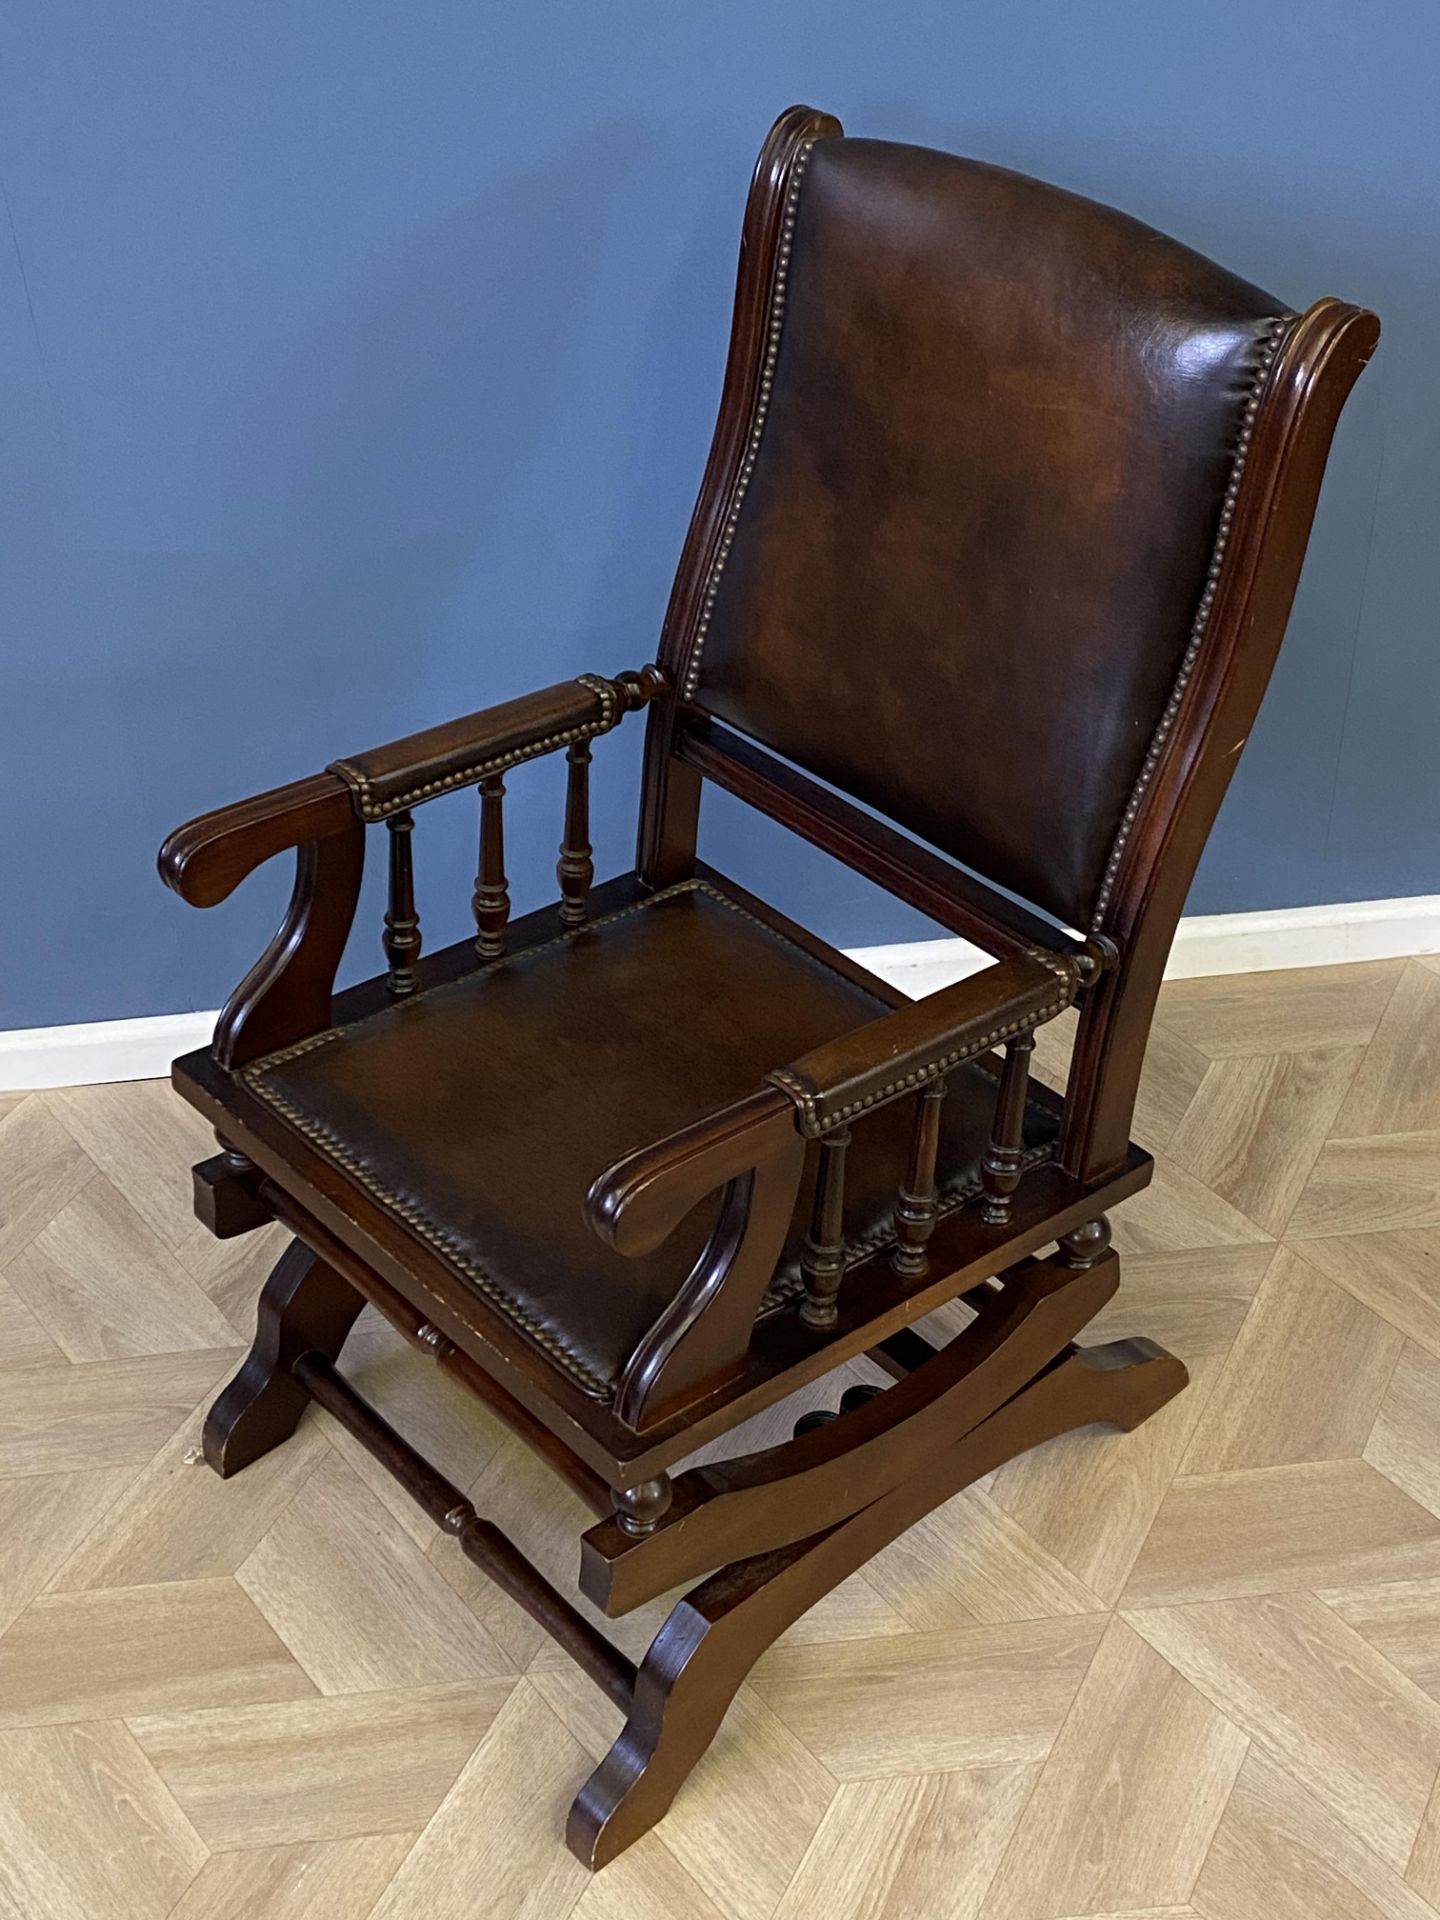 Mahogany framed leather rocking chair - Image 2 of 5